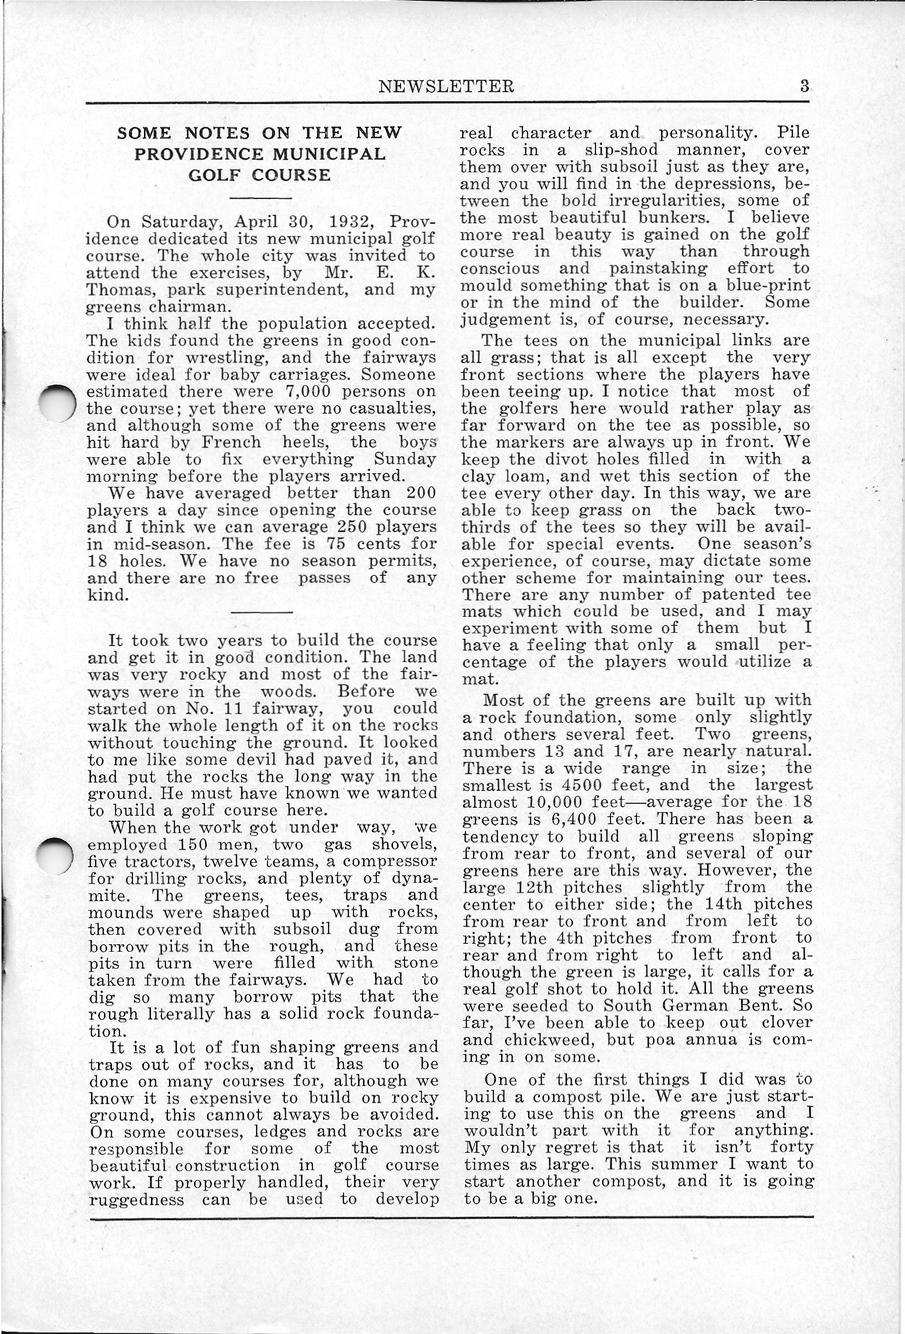 SOME NOTES ON THE NEW PROVIDENCE MUNICIPAL GOLF COURSE On Saturday, April 30, 1932, Providence dedicated its new municipal golf course. The whole city was invited to attend the exercises, by Mr. E. K.